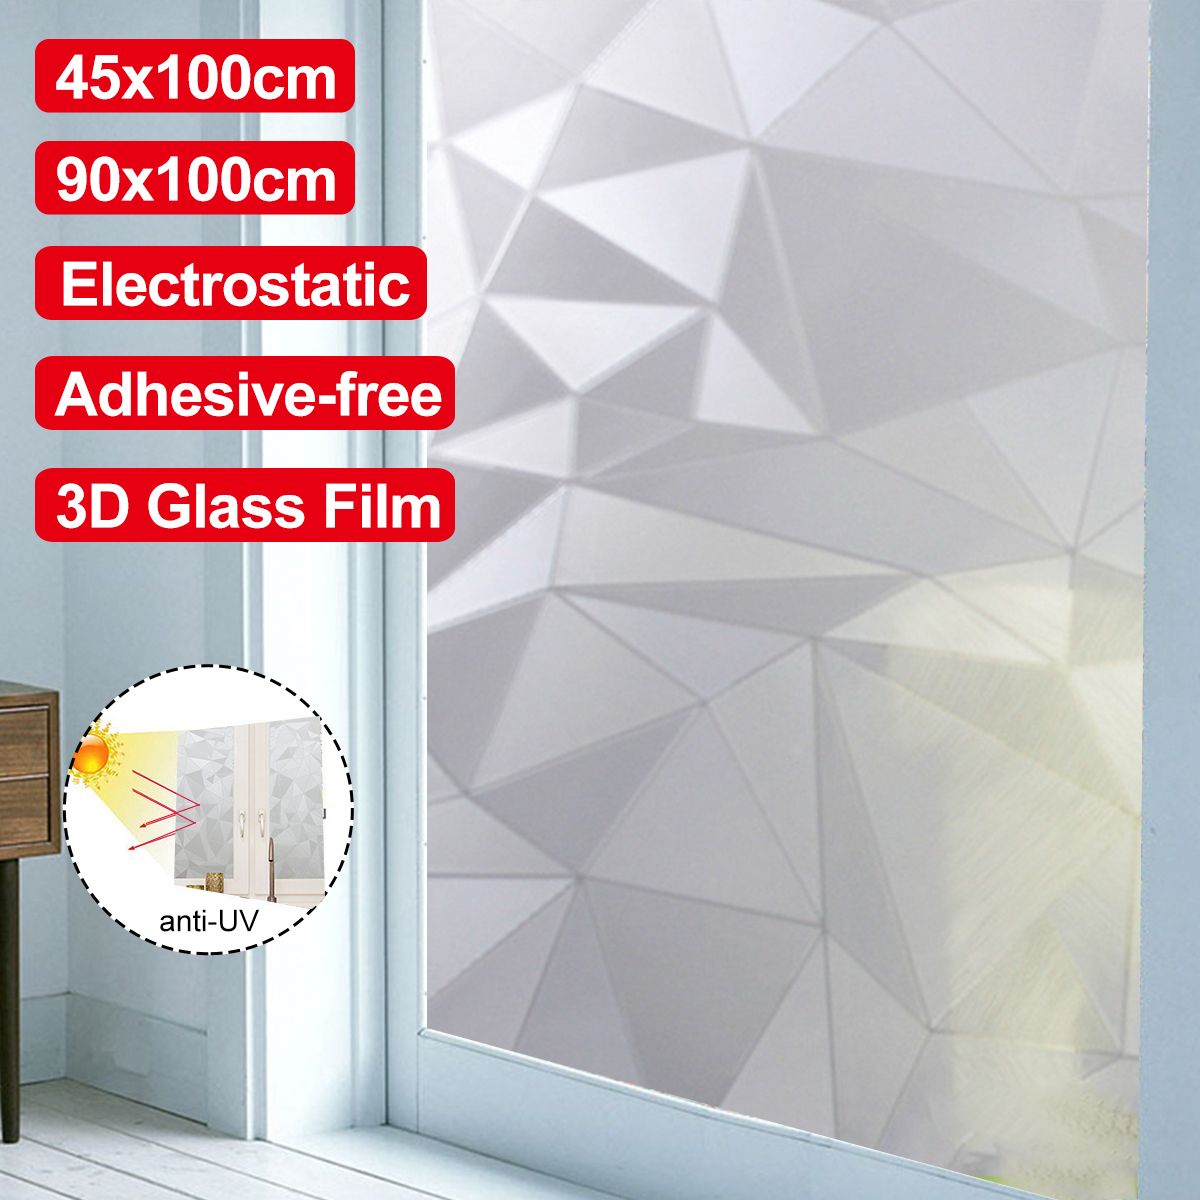 3D-Adhesive-free-Electrostatic-Glass-Window-Film-UV-Protection-For-Home-Office-Decor-1698144